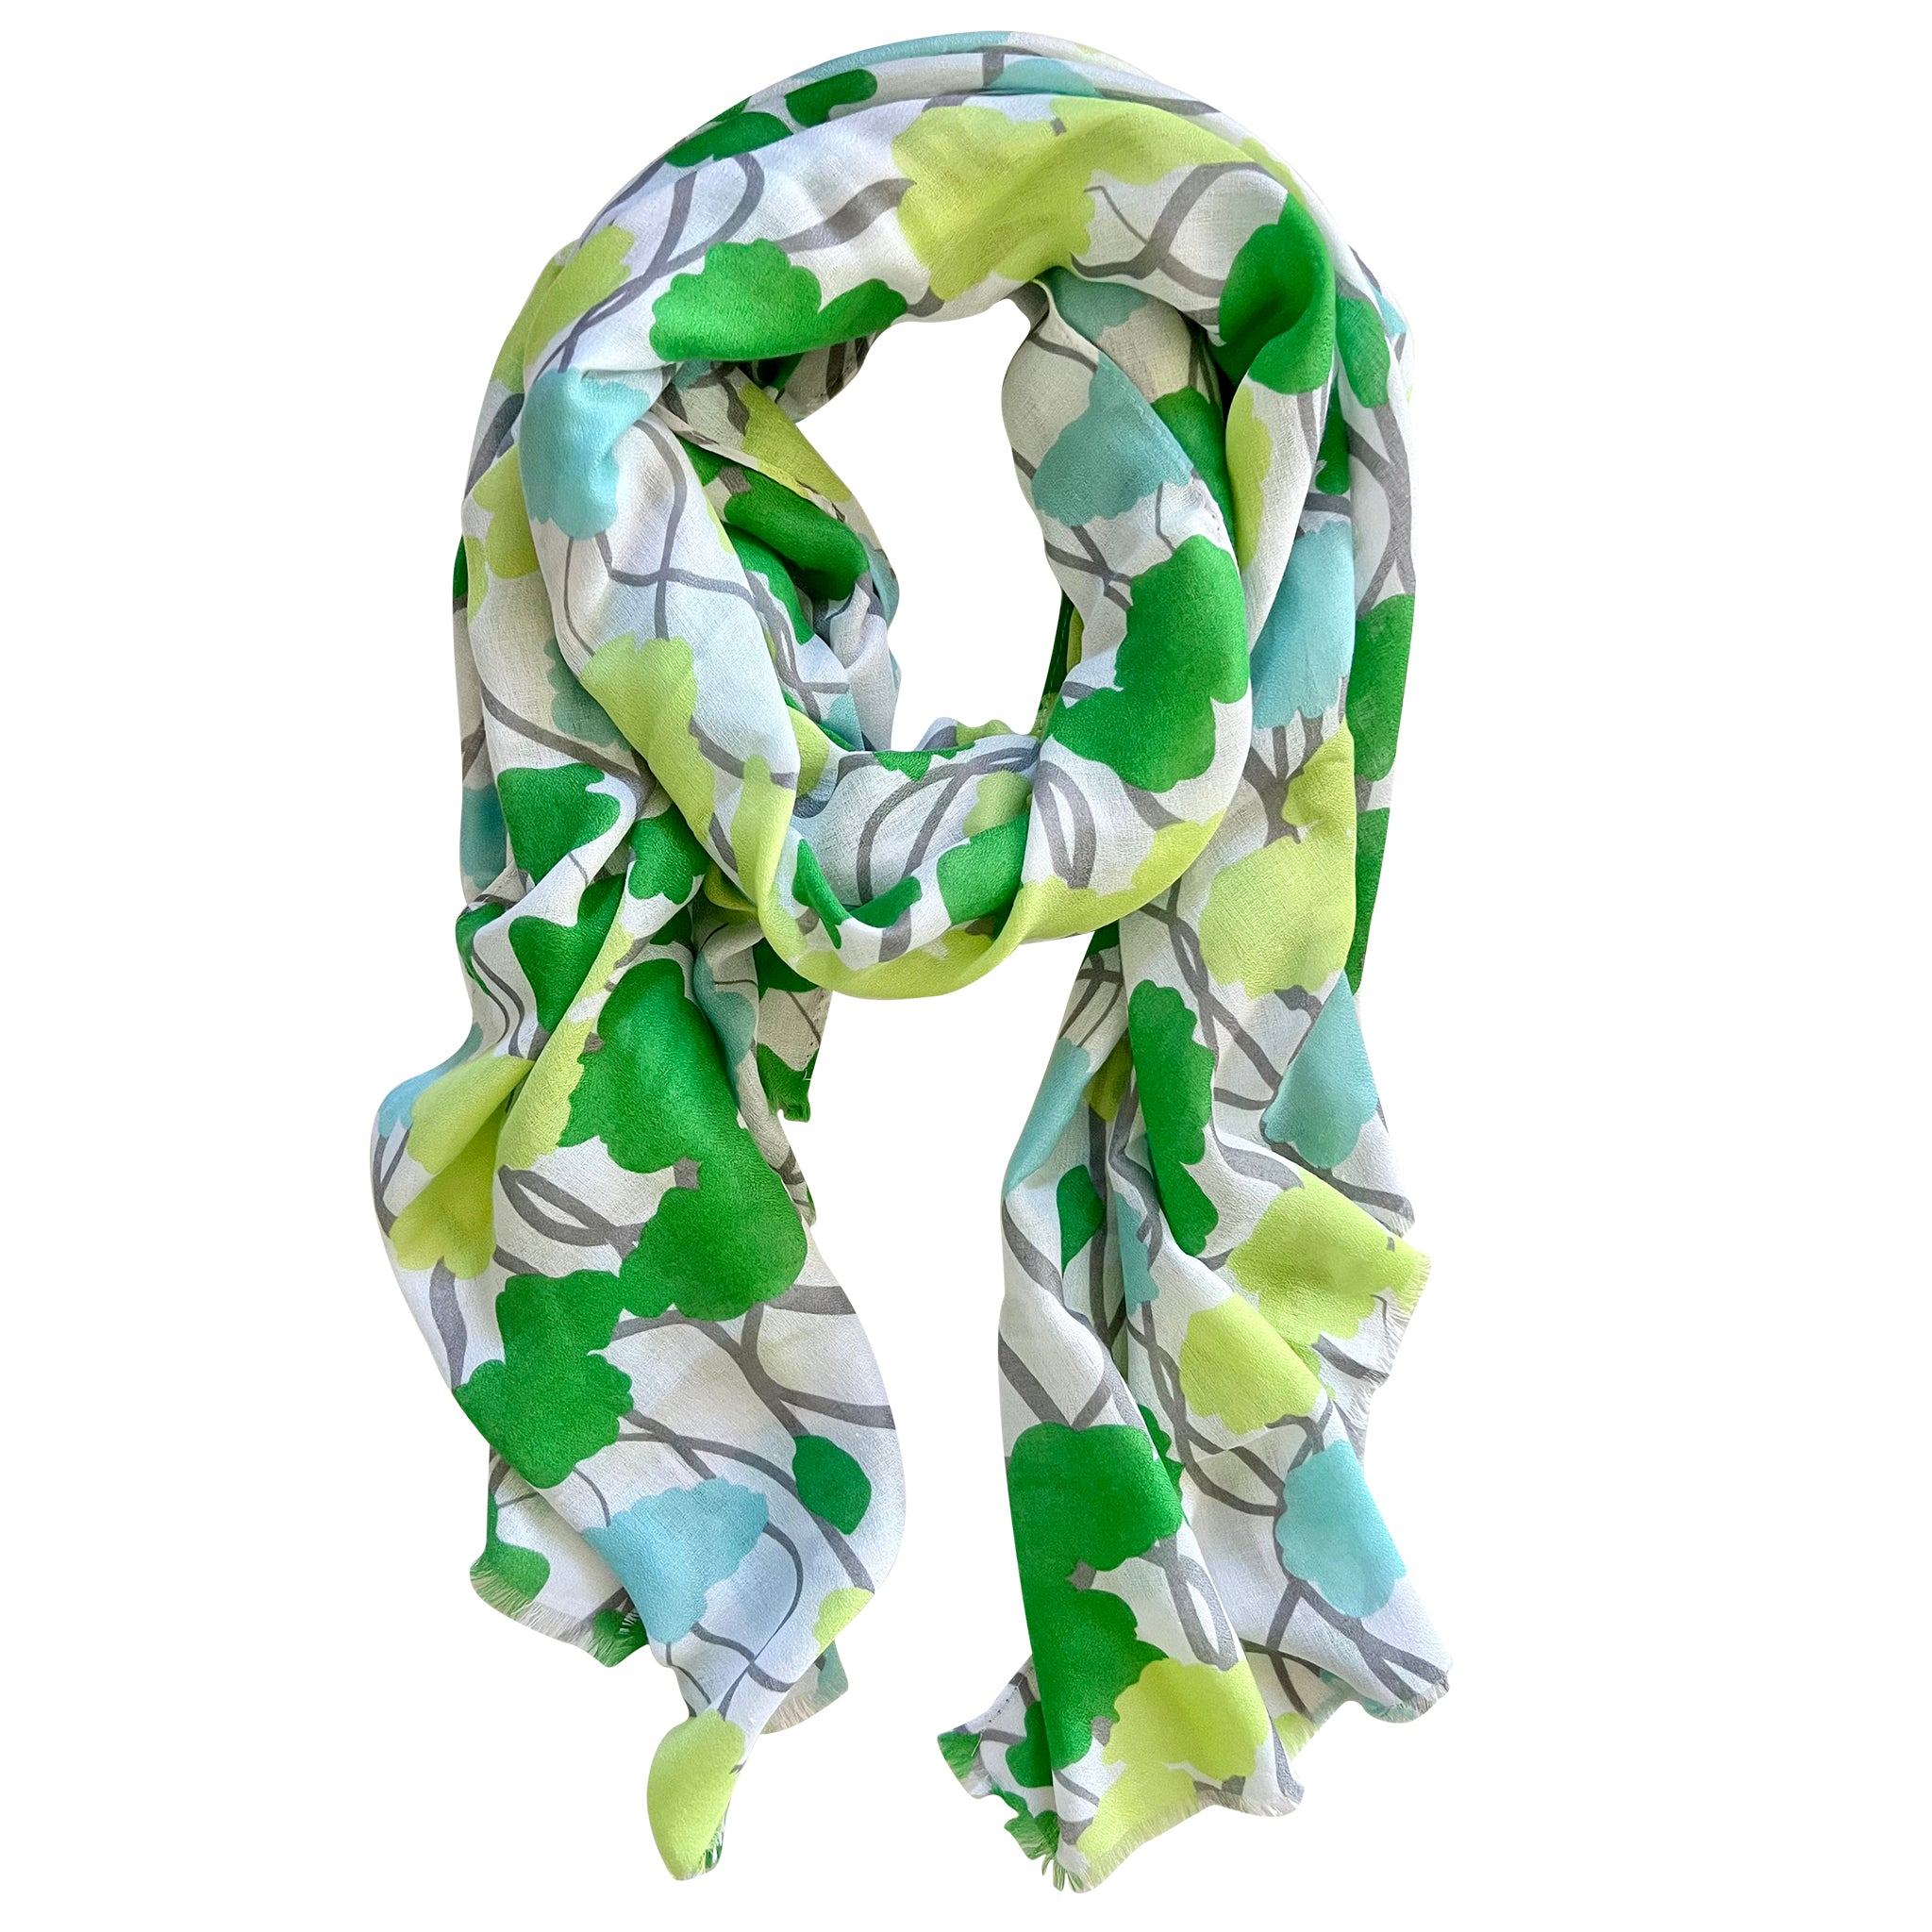 Discover elegance with our floral-patterned scarf in emerald, lime, and aqua, accented with a subtle touch of grey. A perfect accessory for green enthusiasts, adding a vibrant pop to any outfit. Whether a gift or personal use, this scarf is a cherished addition to any collection. Lightweight and versatile, it's ideal for year-round wear. Crafted from a comfortable polyester blend.